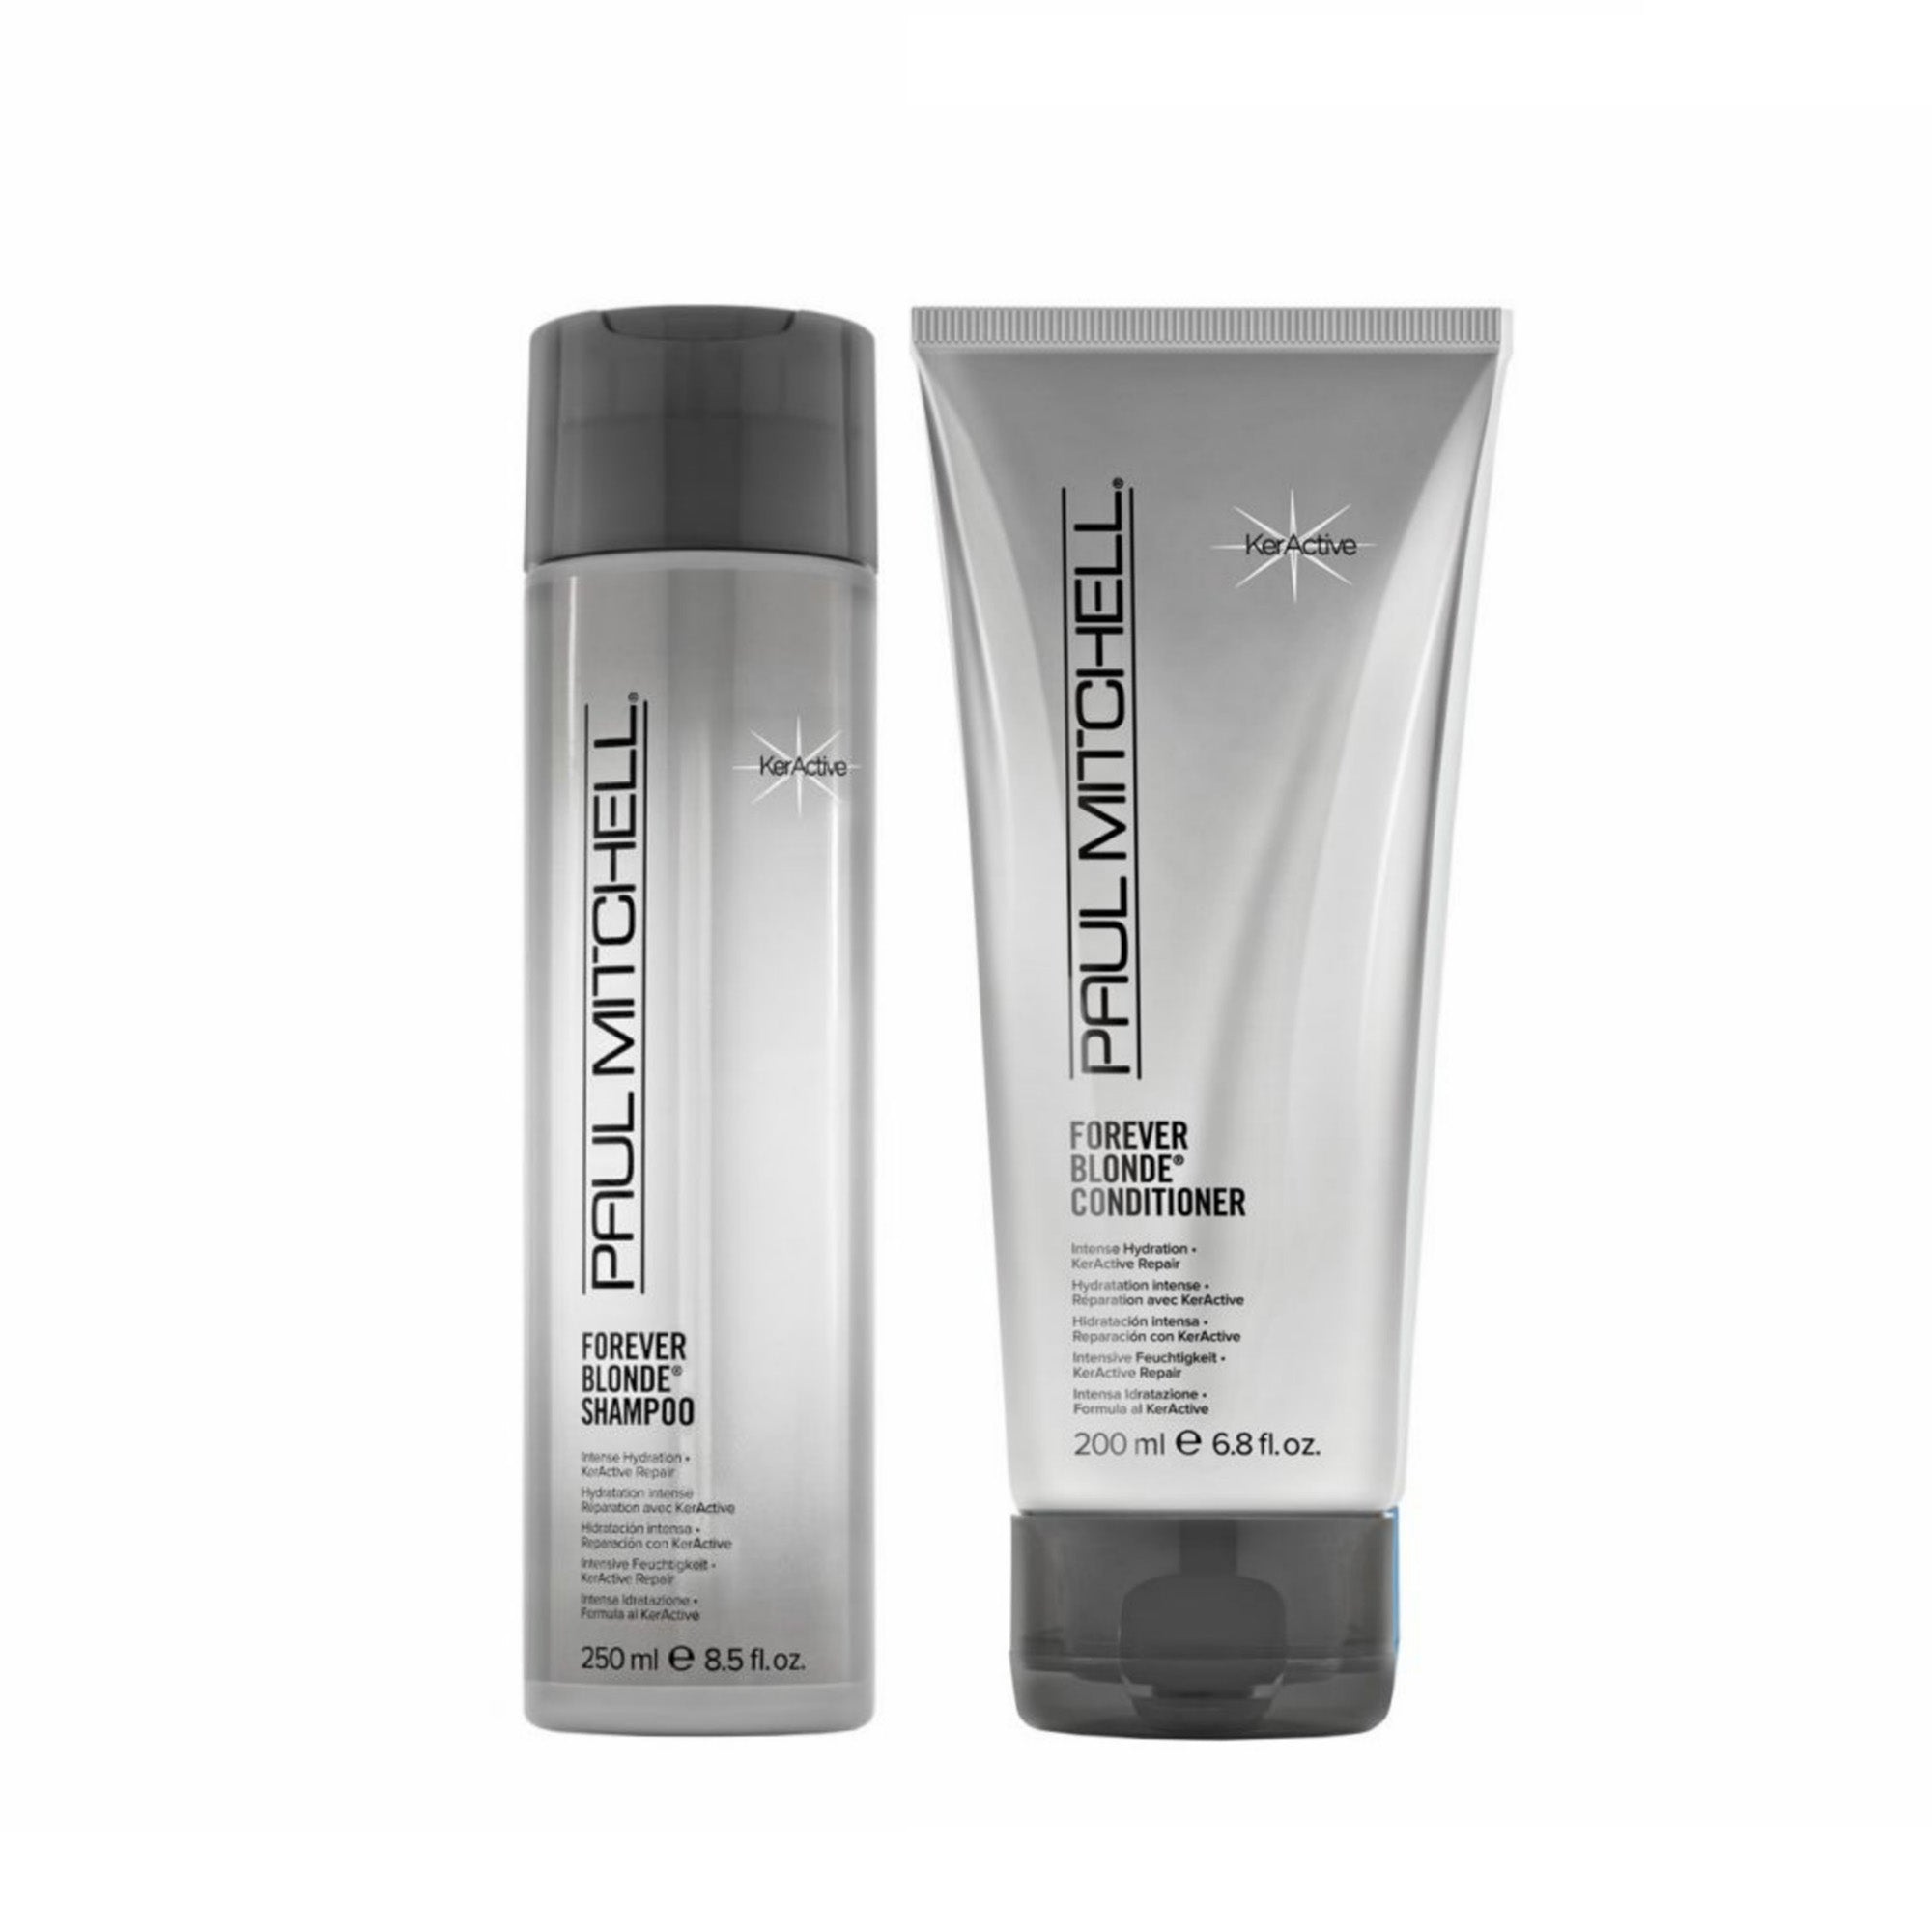 Paul Mitchell Forever Blonde Hair Shampoo & Conditioner